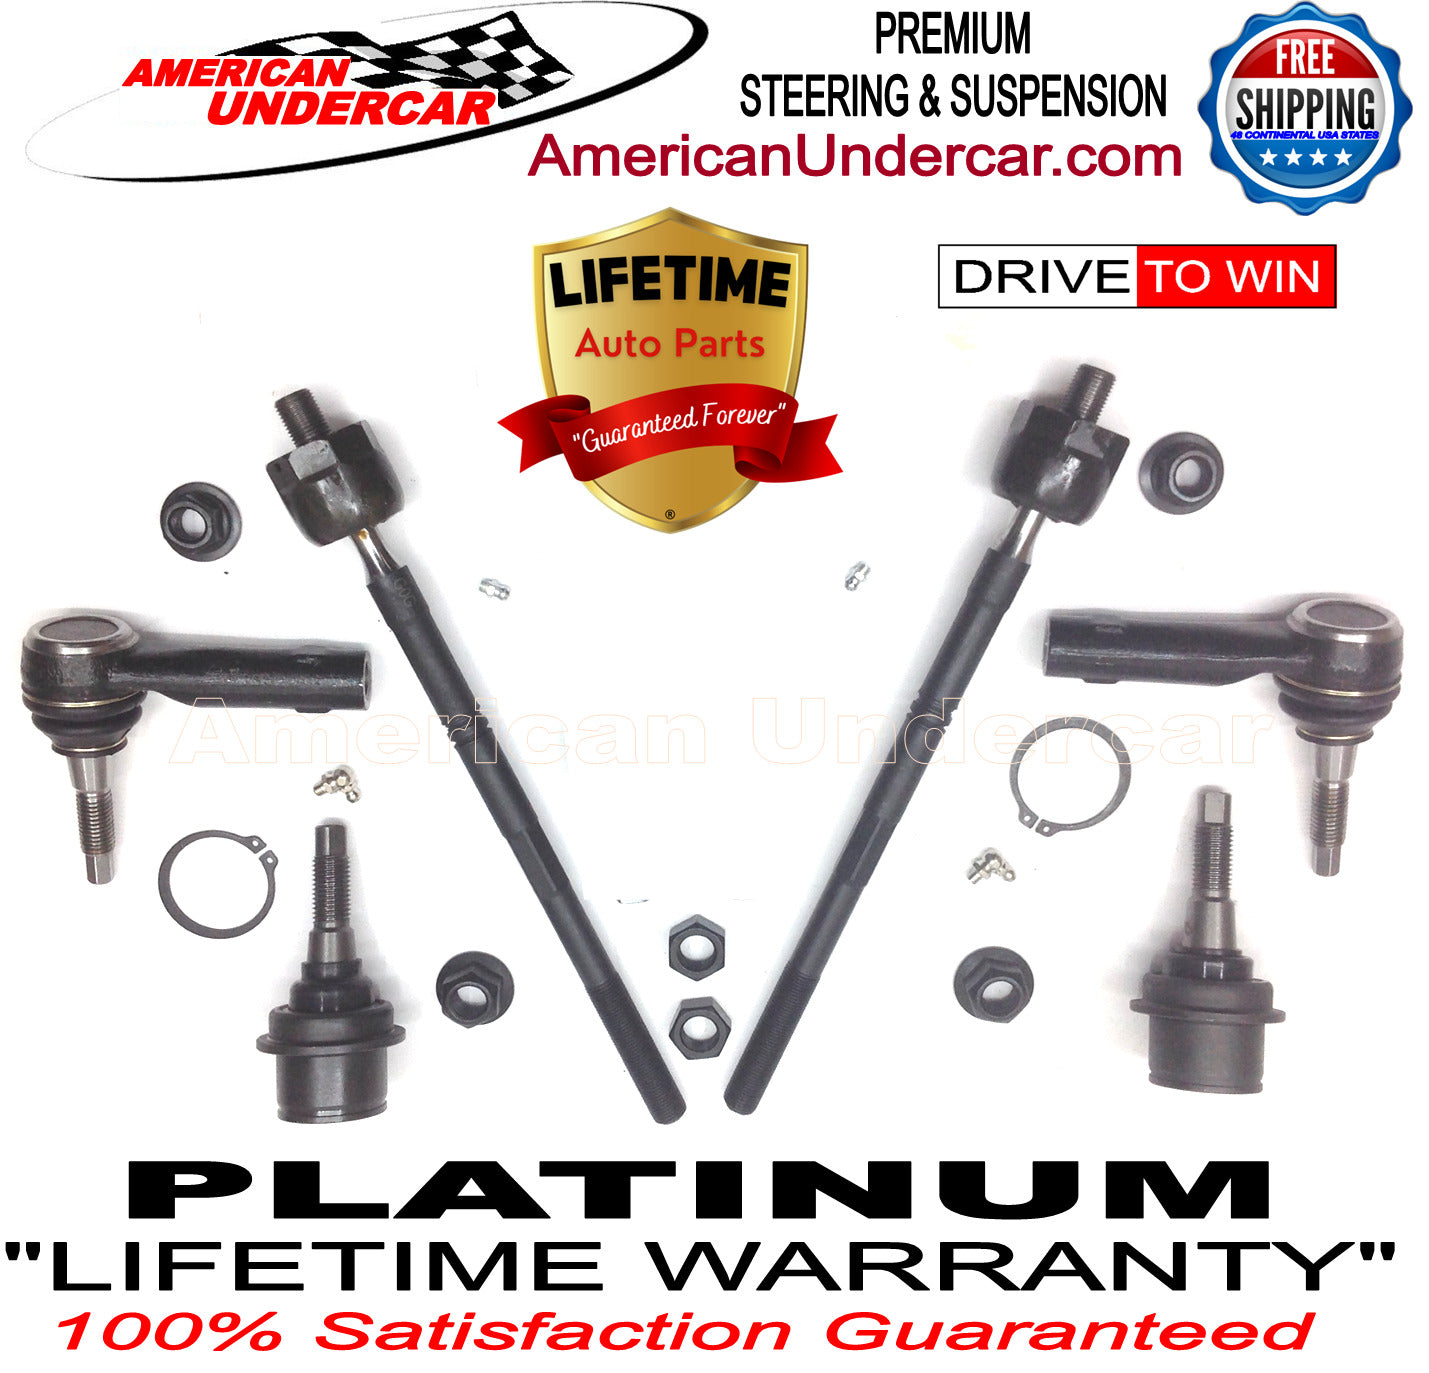 Lifetime Lower Ball Joints Tie Rod Steering Kit for 2003-2006 Ford Expedition 2WD